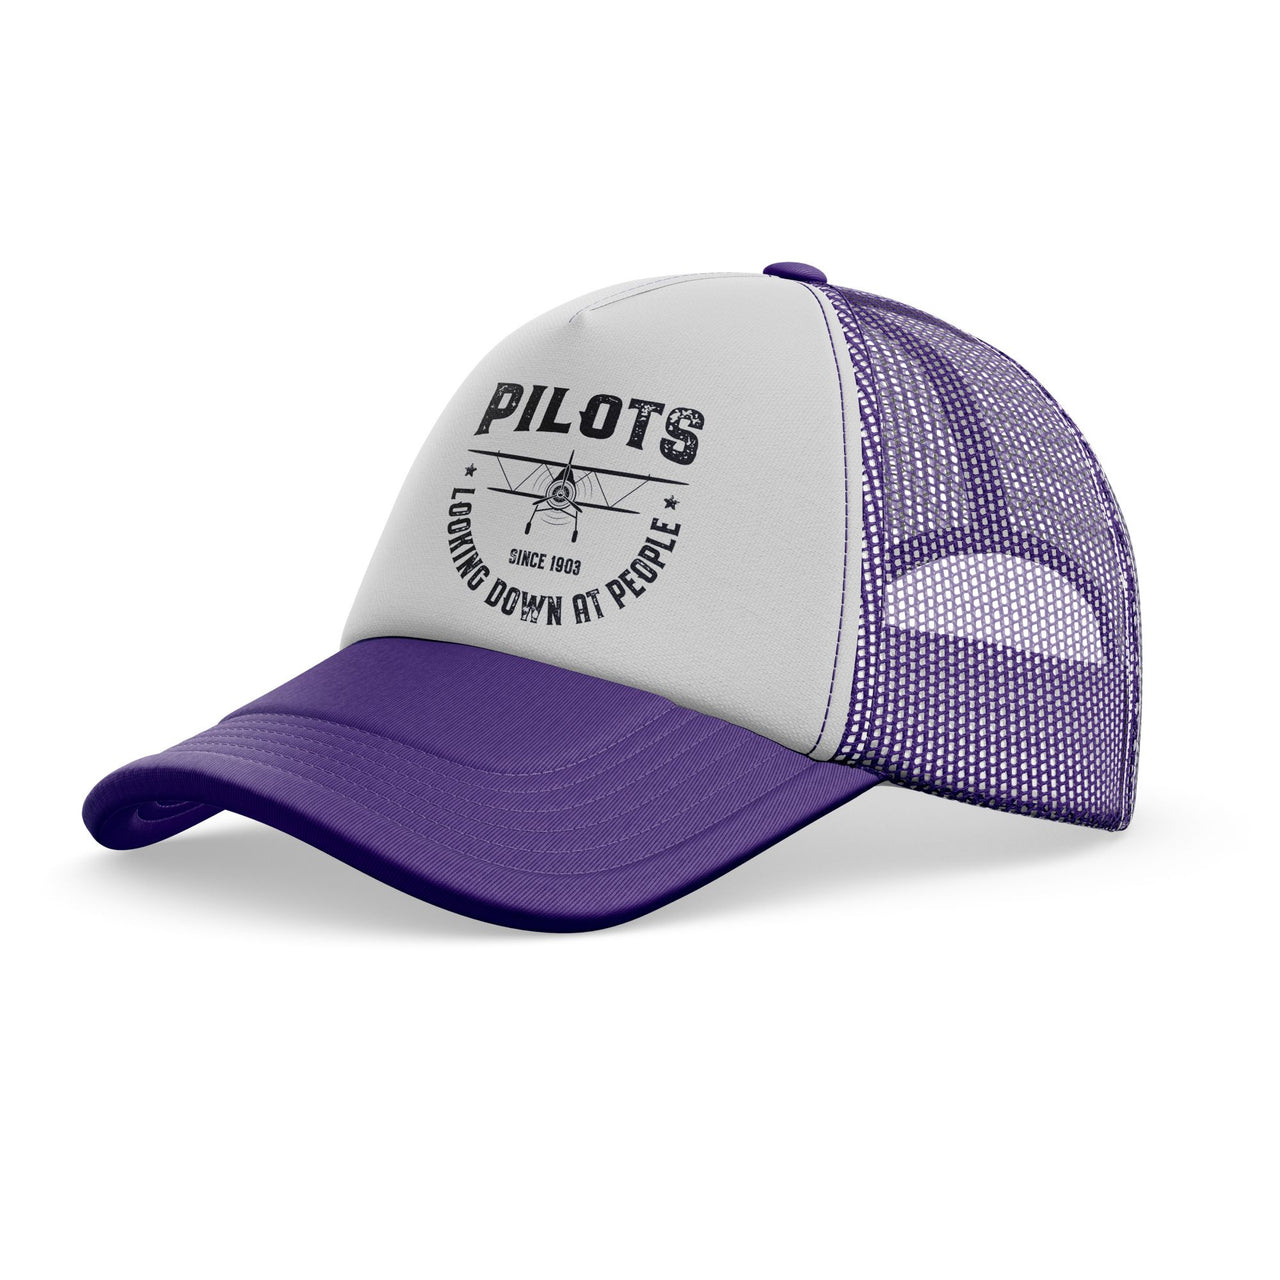 Pilots Looking Down at People Since 1903 Designed Trucker Caps & Hats